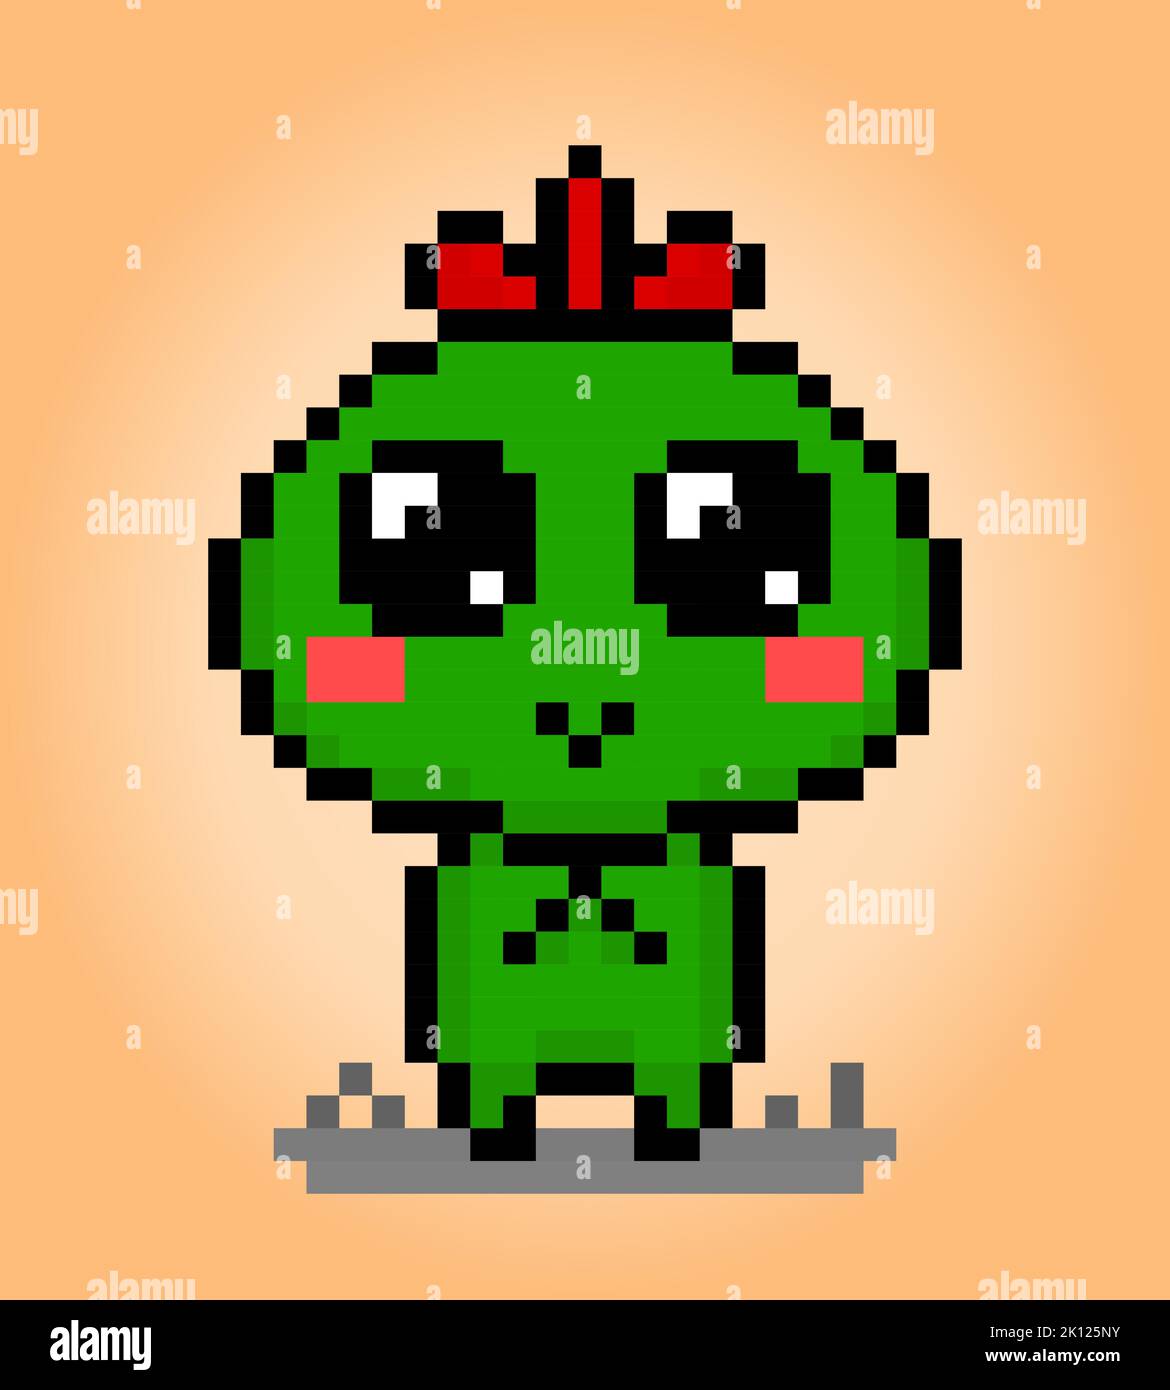 8 bits pixel alien cute. Green Creature for asset games or cross stitch patterns in vector illustrations. Stock Vector